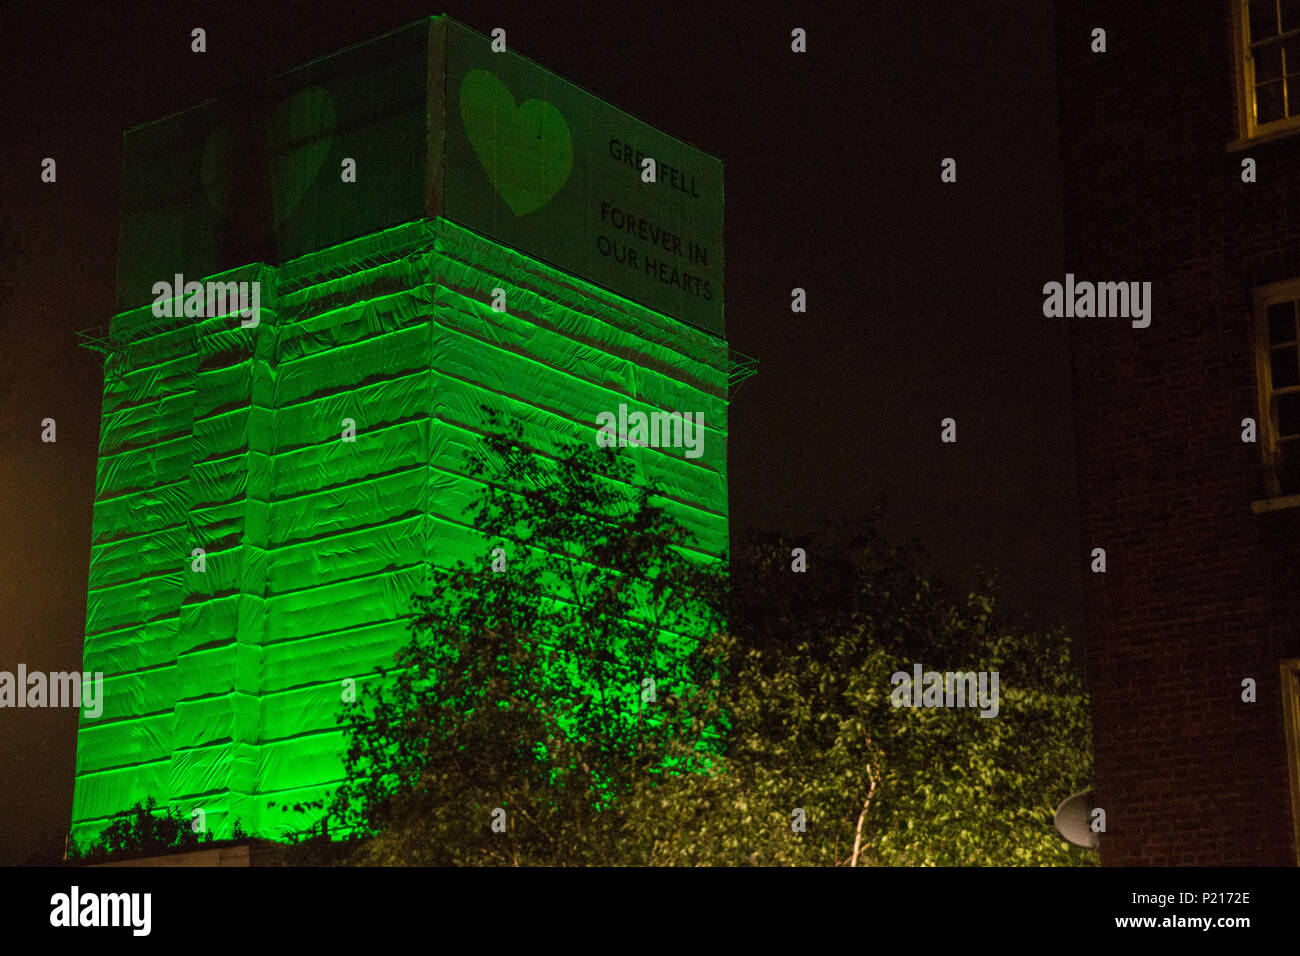 London, UK. 14th June, 2018. The Green for Grenfell illuminations are lit at the Grenfell Tower and the twelve closest tower blocks on the first anniversary of the fire in a display intended to 'shine a light' of love and solidarity for all those affected and to raise awareness of the plight of those still without new homes after one year. Green for Grenfell is a community-led initiative in collaboration with tenants' and residents' associations and Grenfell United. Credit: Mark Kerrison/Alamy Live News Stock Photo